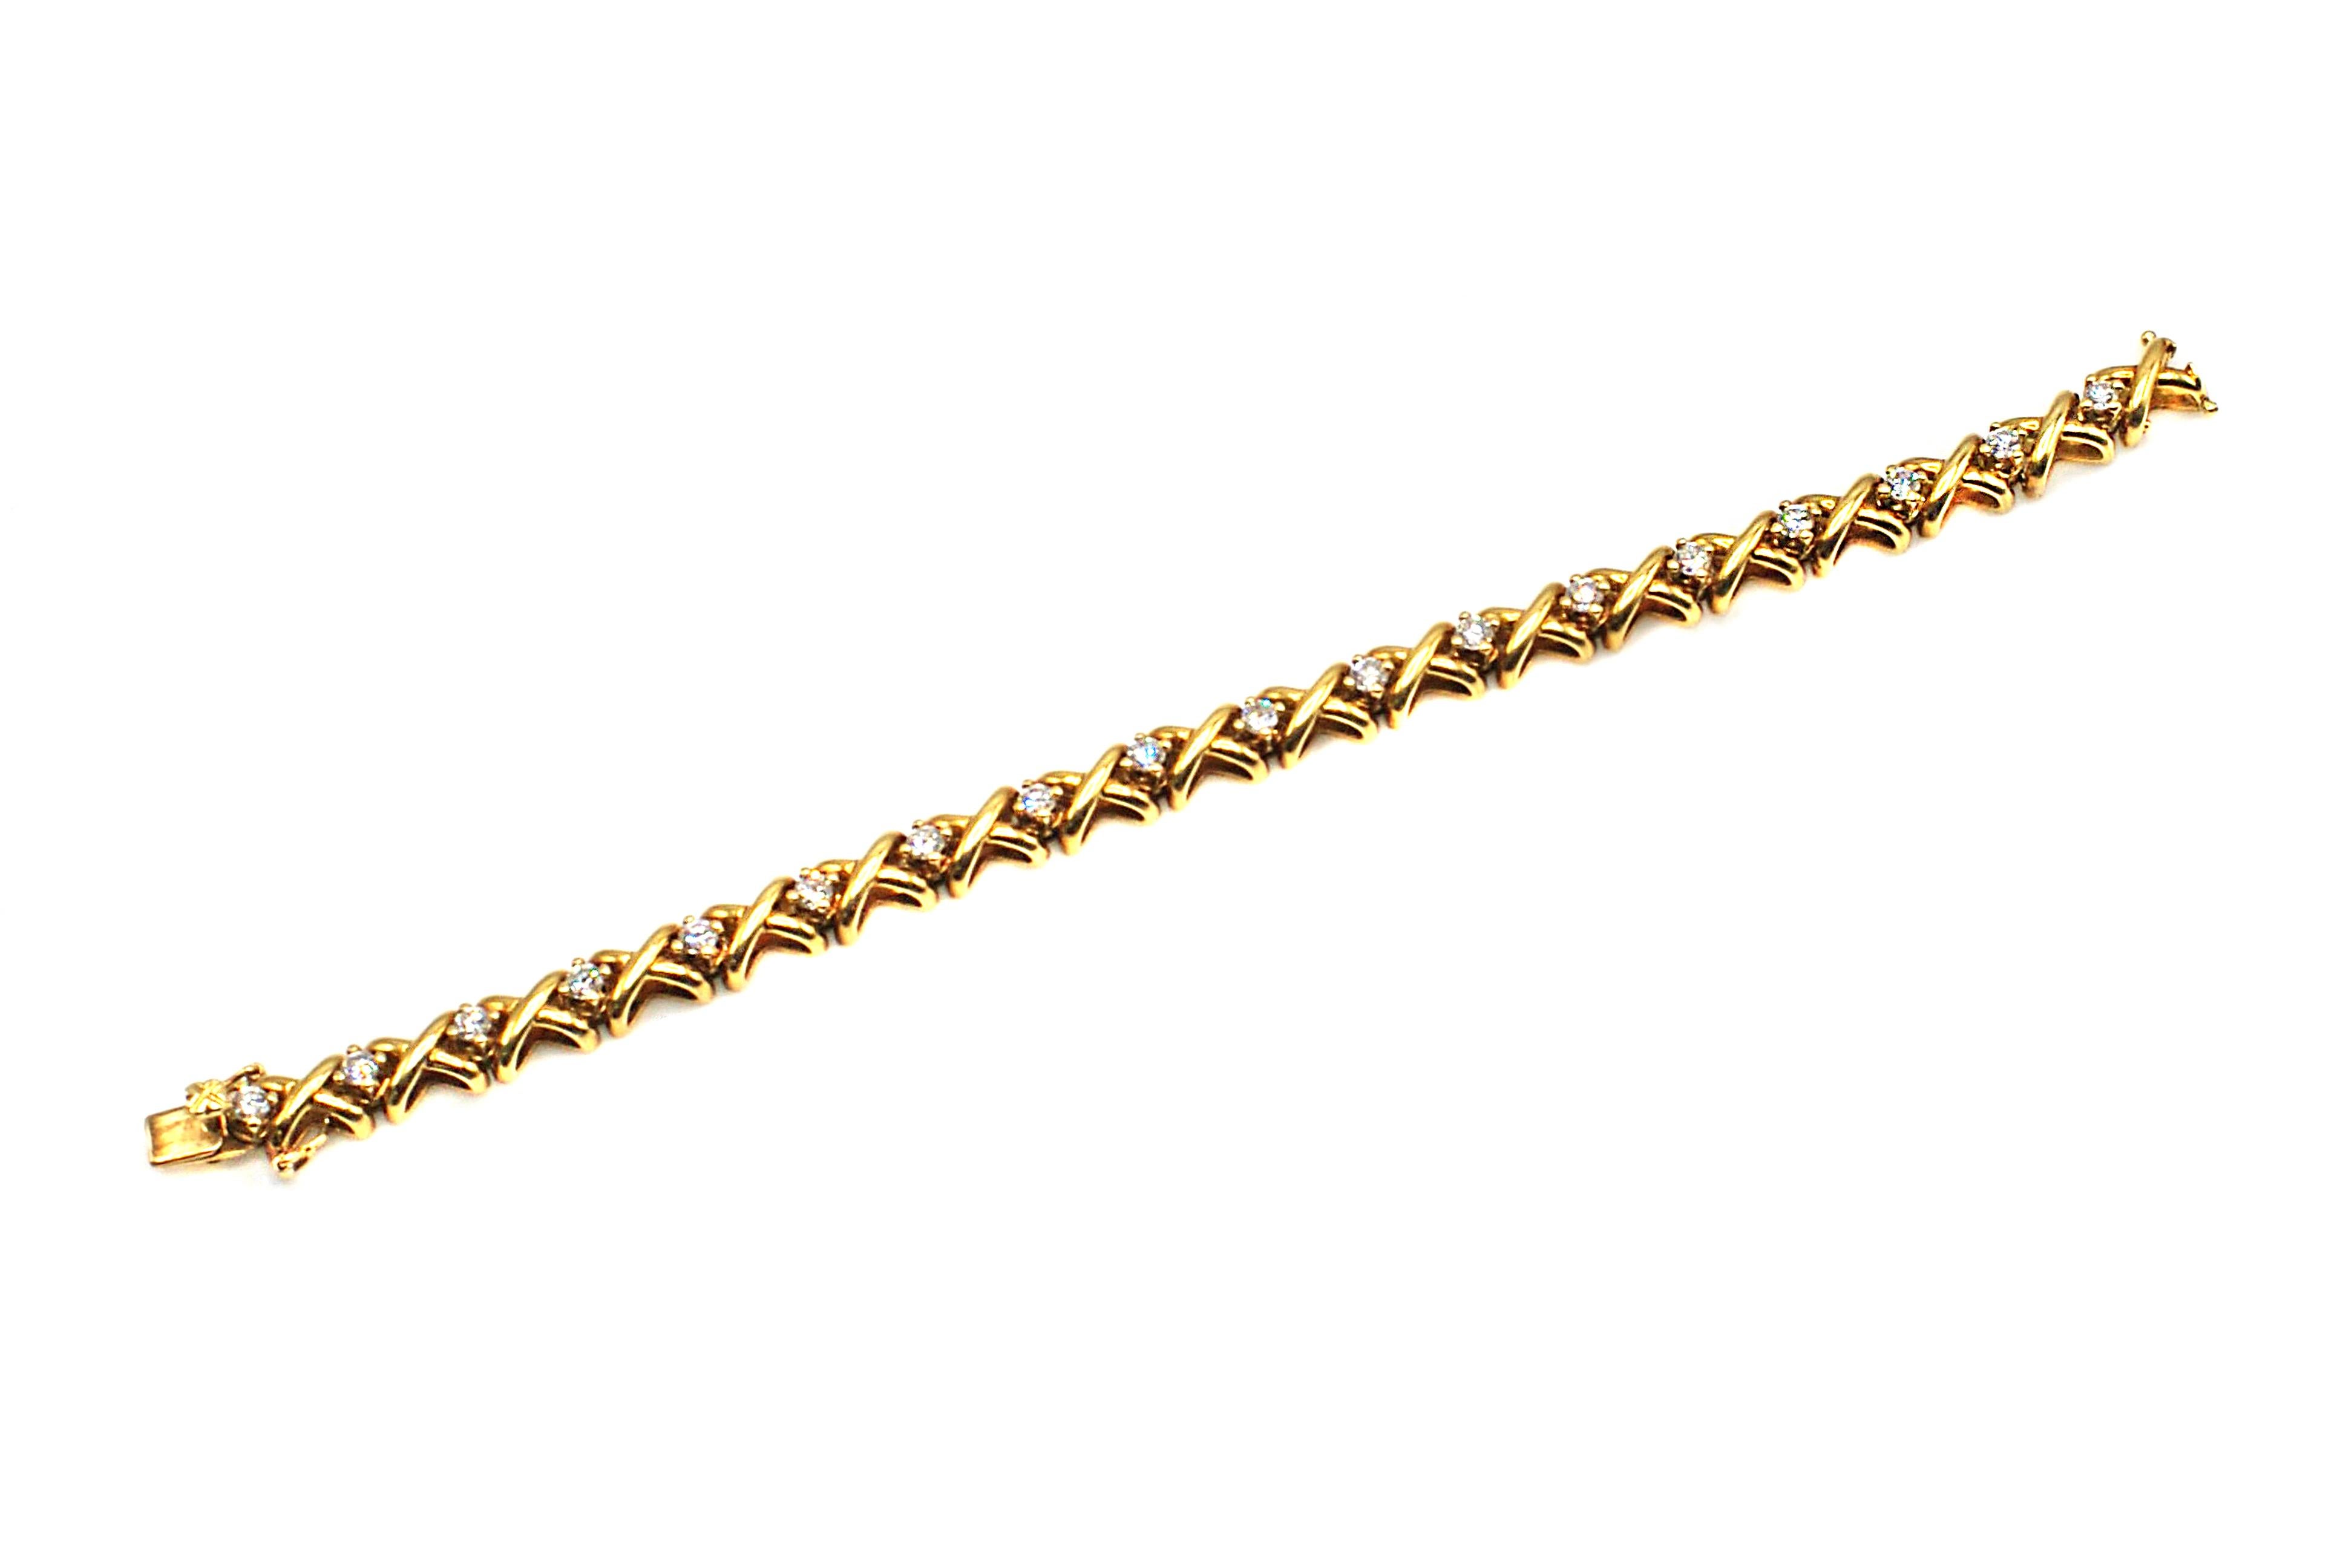 Chic 18 karat yellow gold diamond bracelet, finely crafted out of 18 golden x's and separated by bright white round brilliant cut diamonds. The smooth finish of this bracelet makes for a most comfortable wear and an elegant accessory for any